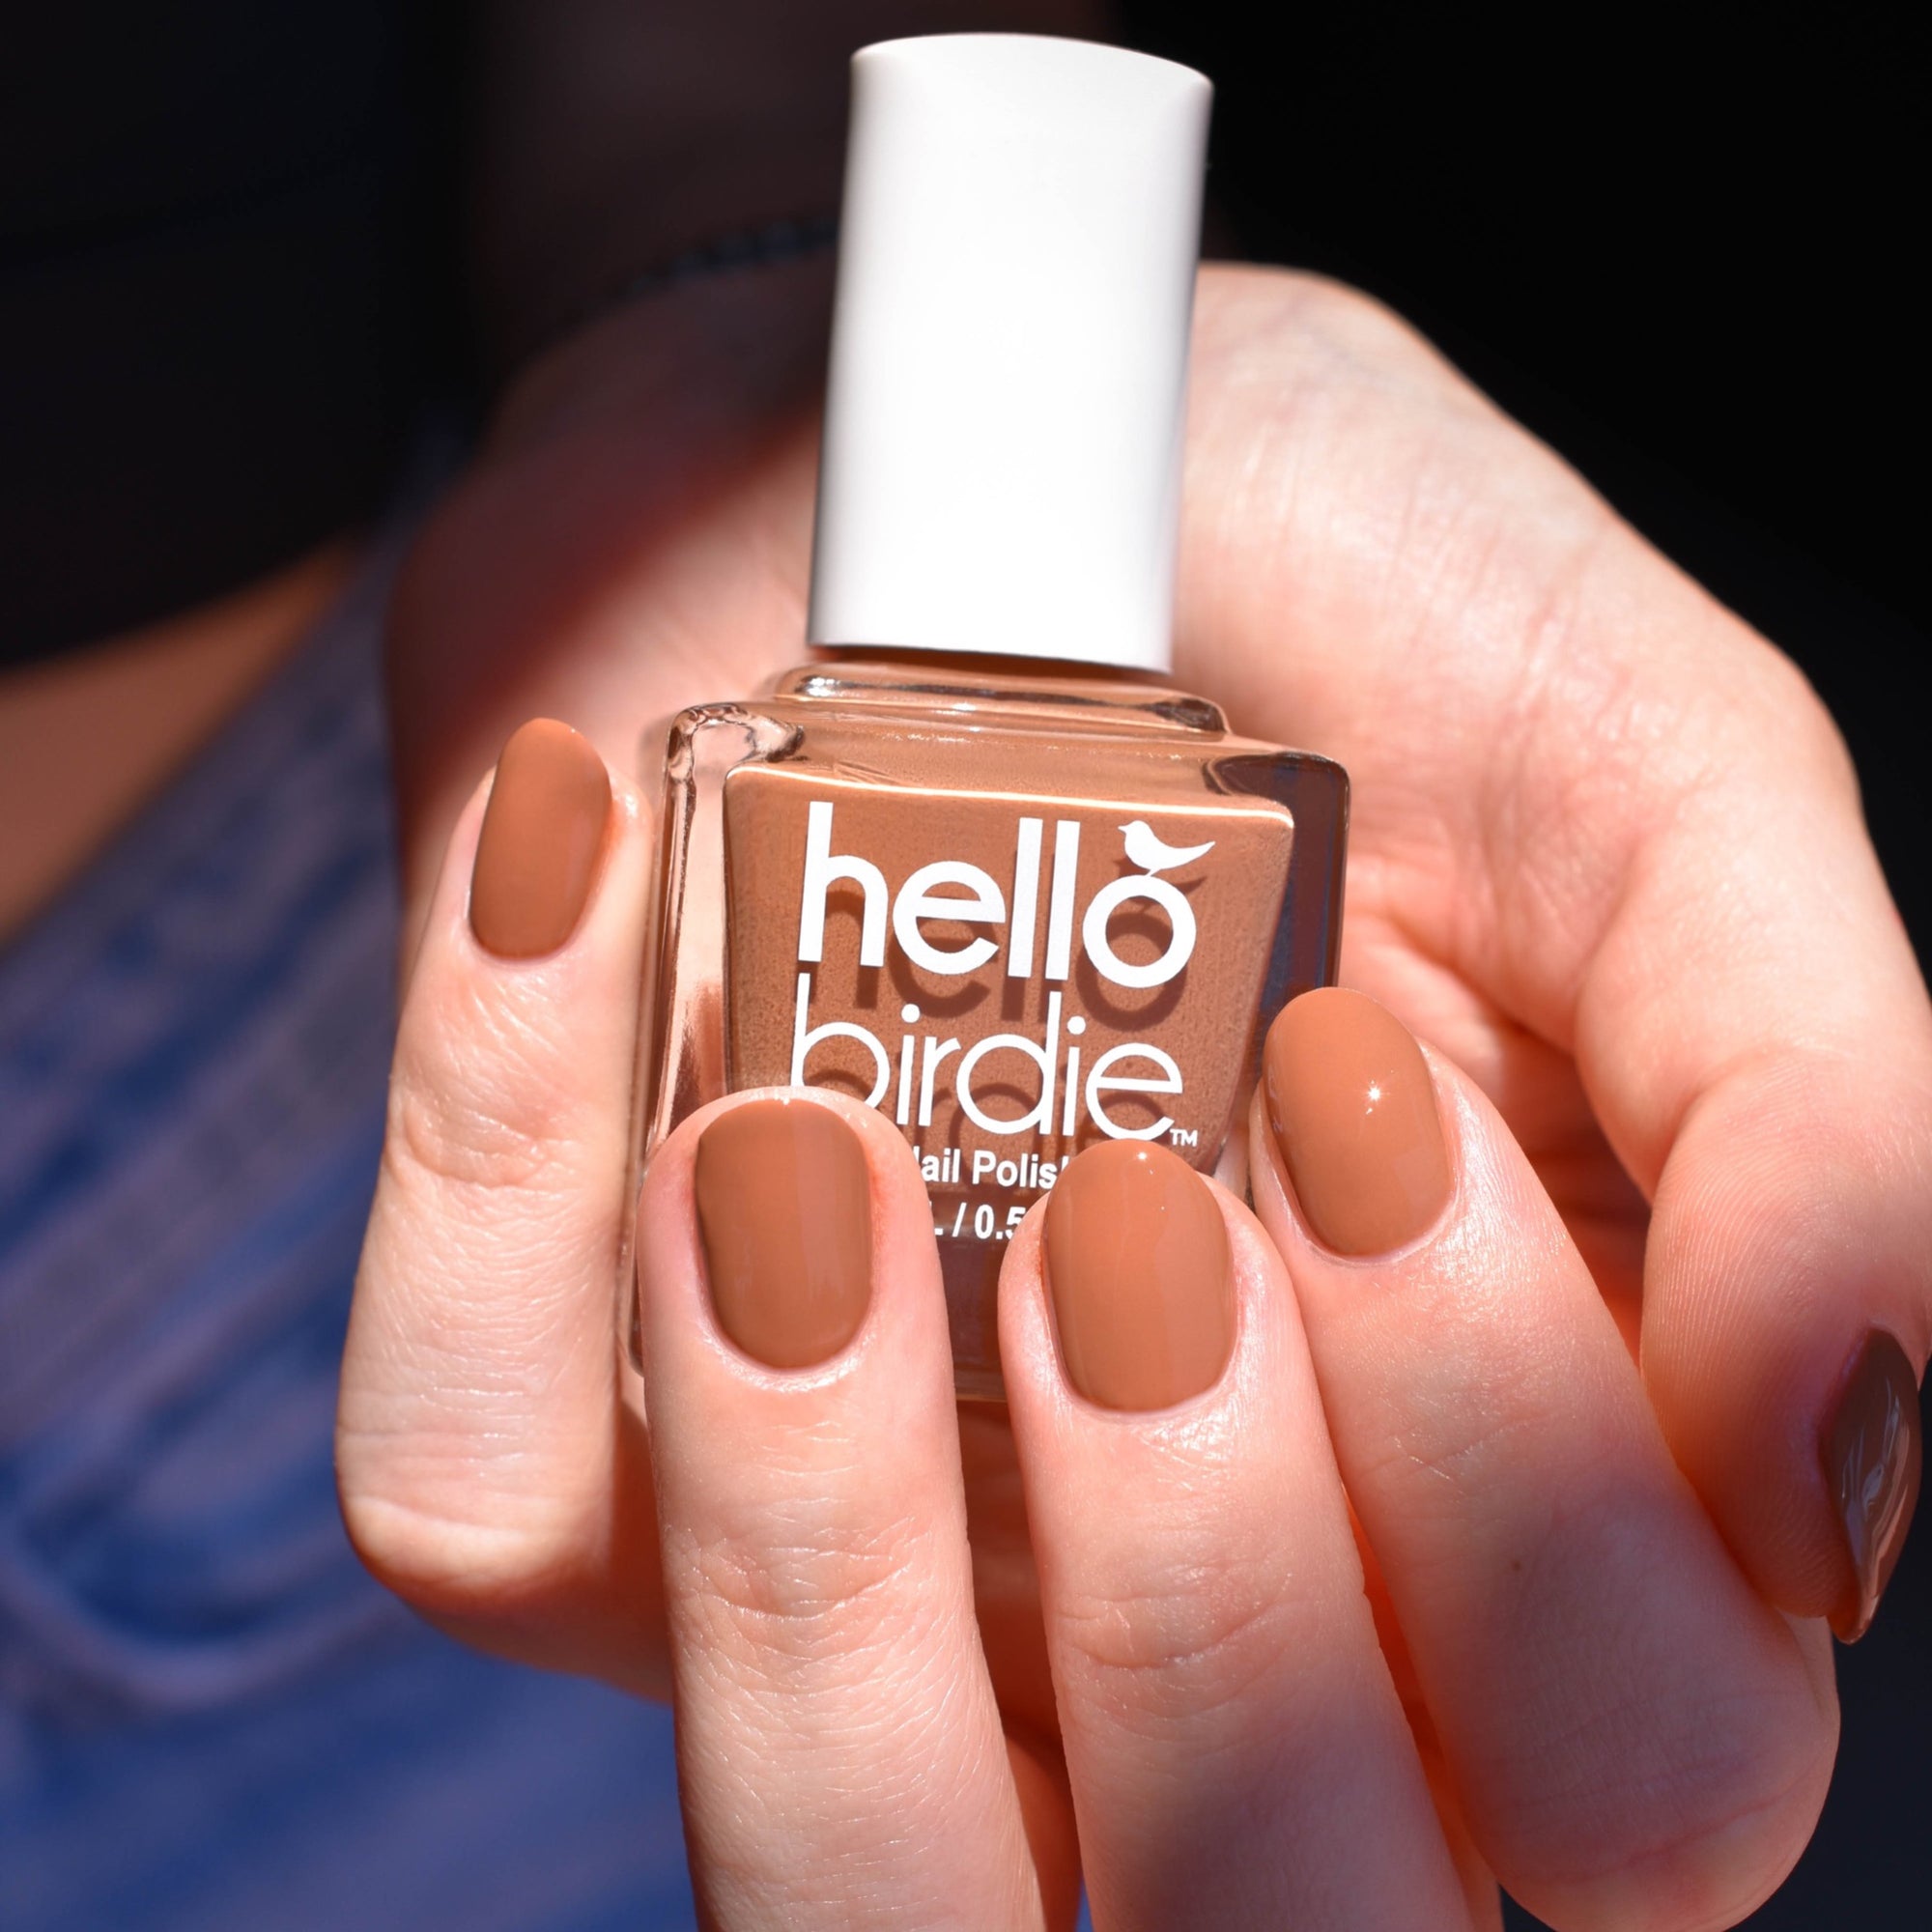 A close up of a light toned hand is illuminated by a beam of light. The hand is cradling a bottle of Quail nail polish from Hello Birdie which is a medium caramel color. The bottle is cube shaped with a white cap and white text. The nails are painted with the same polish and the background is the model's midsection with black shirt and jeans in shadow.